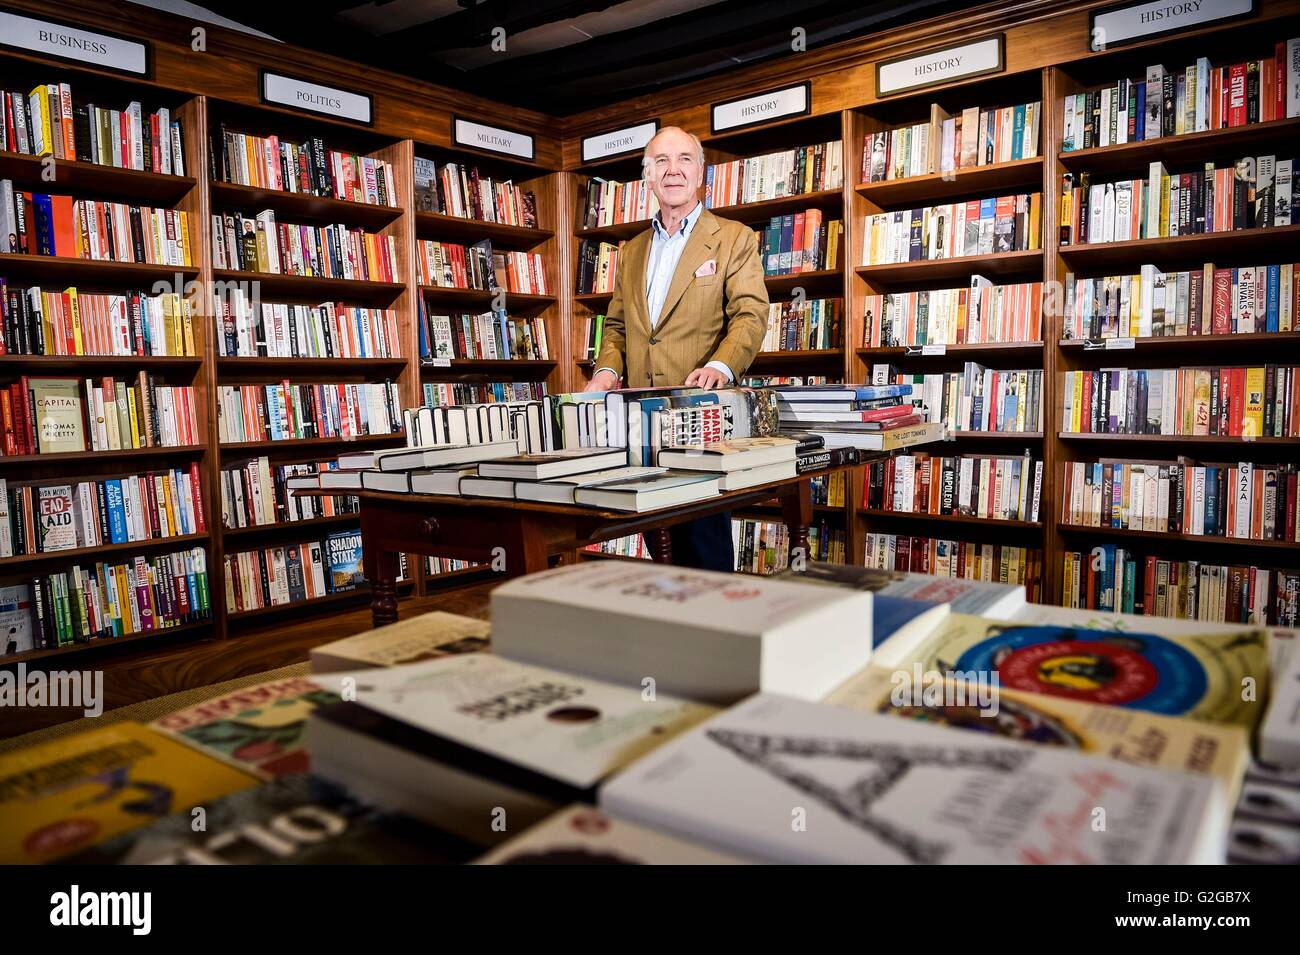 Robert Hiscox in his White Horse Bookshop in Marlborough, Wiltshire, as the city grandee has launched a blistering attack on David Cameron's campaign to remain in the EU, dubbing it 'corrupt' and accusing the Treasury of disseminating 'illegal propaganda'. Stock Photo